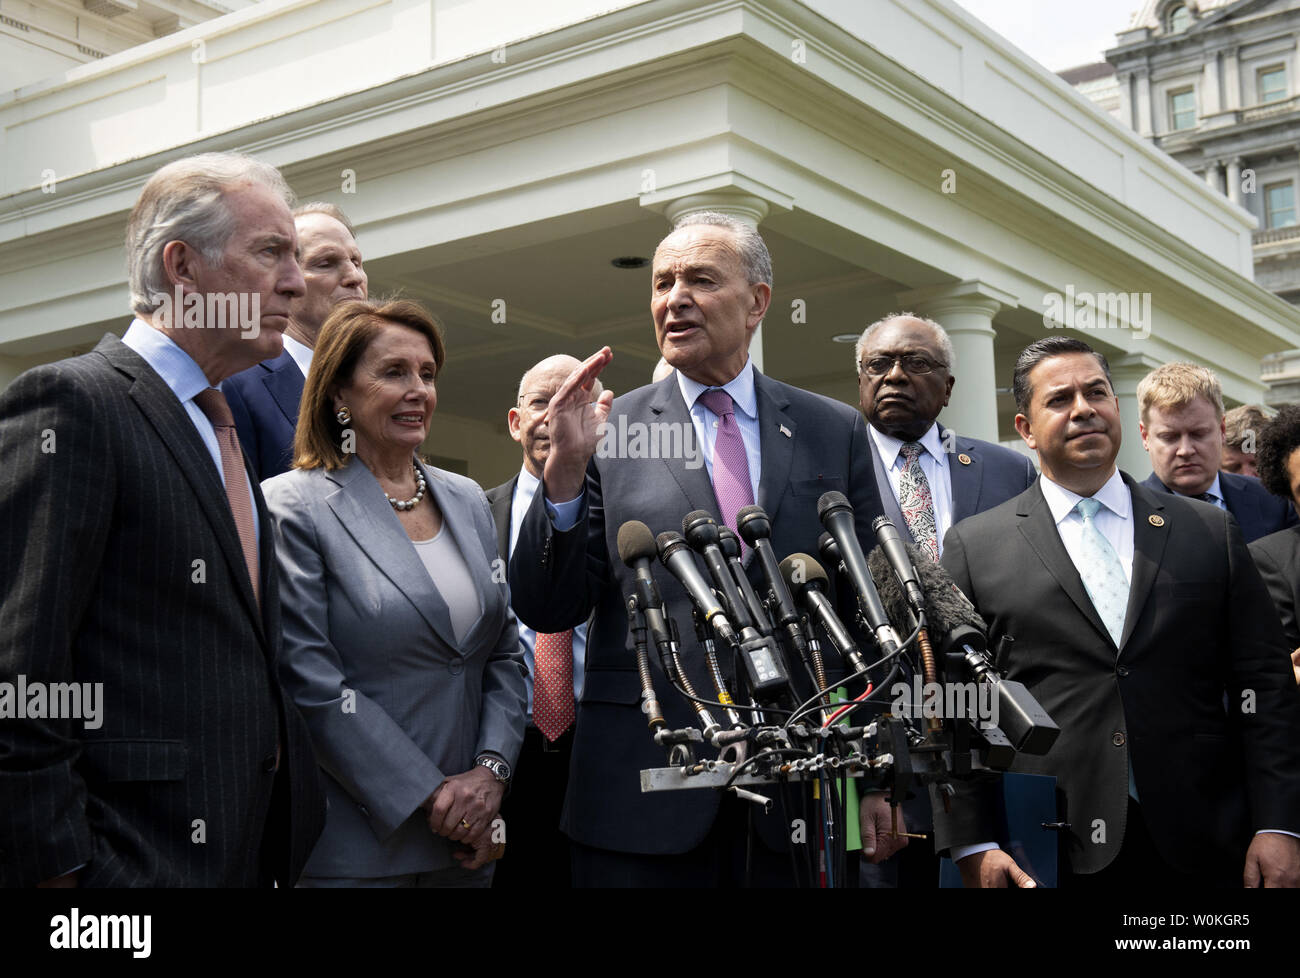 Senate Minority Leader Chuck Schumer and Speaker of the House Nancy Pelosi talk to reporters with other Democratic leaders after meeting President Donald Trump at the White House in Washington on April 30, 2019.  Democrat congressional leaders met with Trump on a possible two trillion dollar infrastructure legislation.    Photo by Pat Benic/UPI Stock Photo